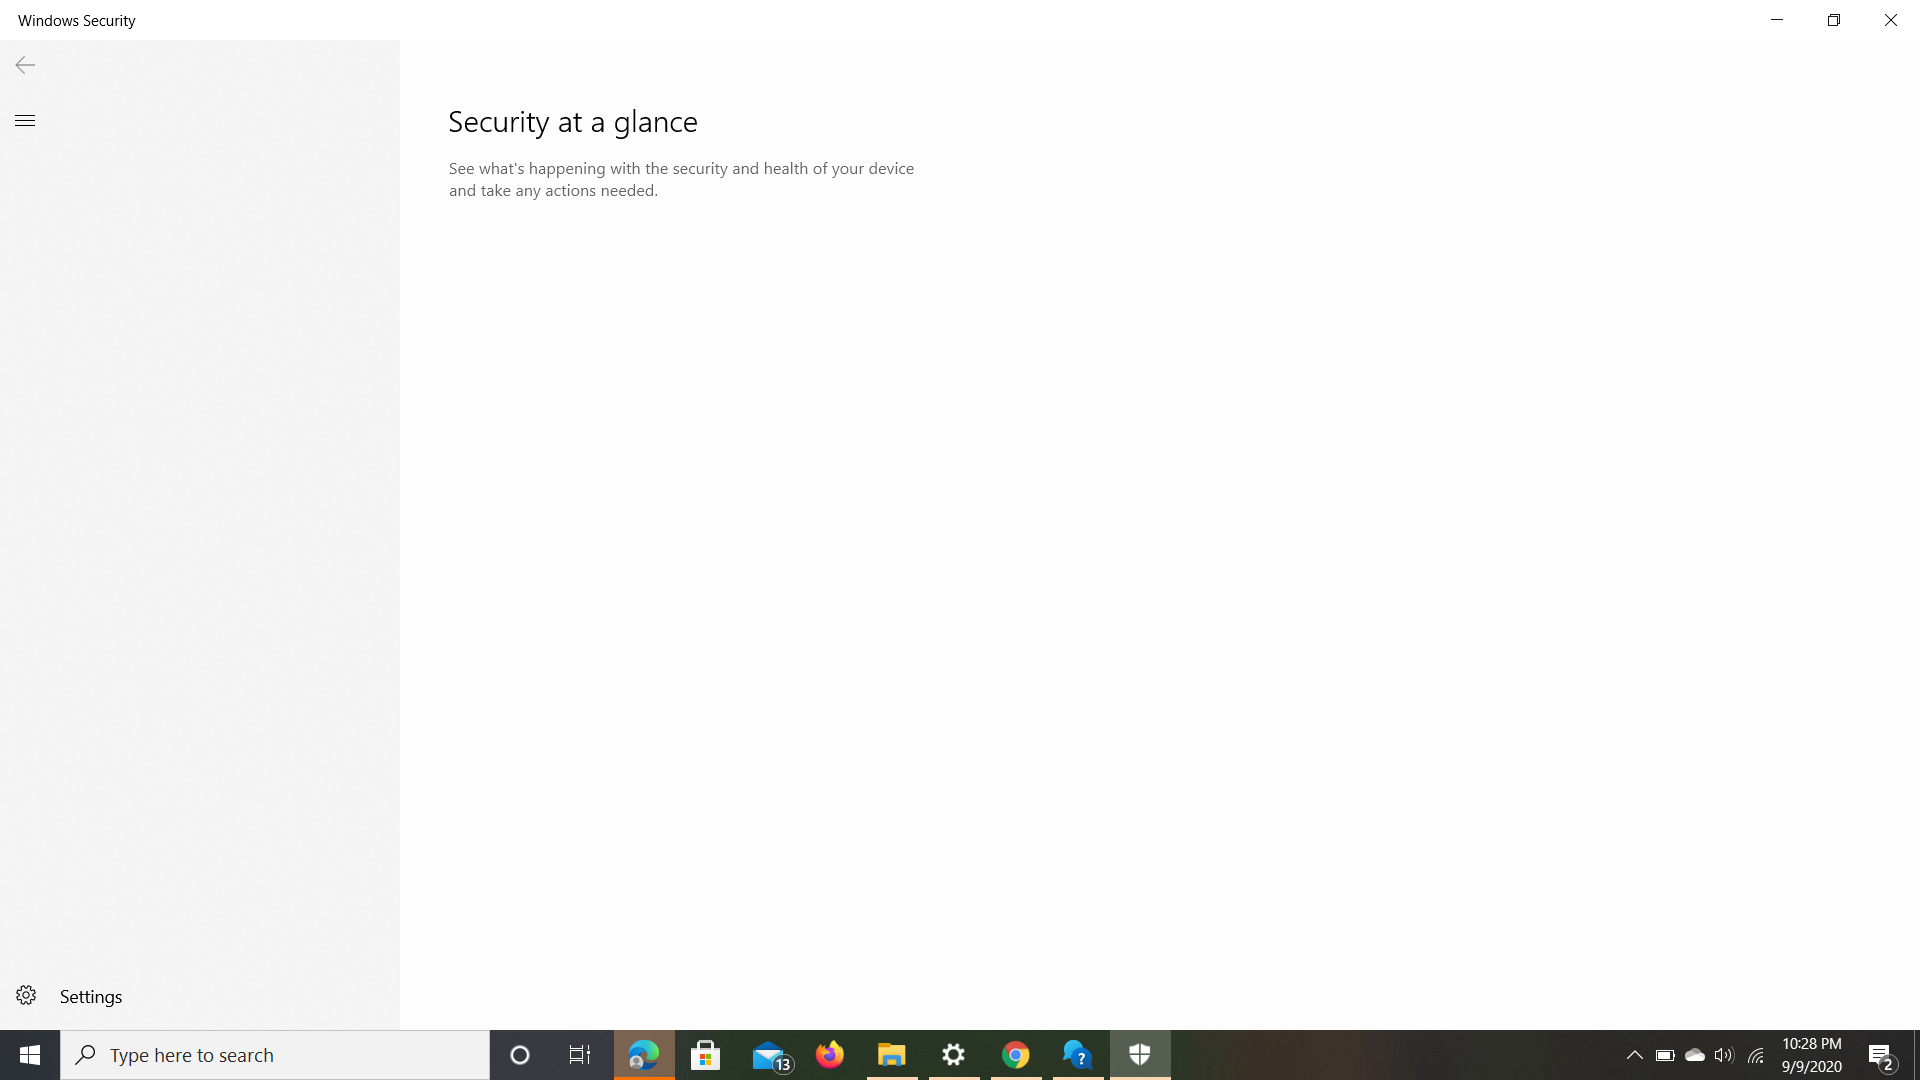 My windows security is not working f4c87d46-8b78-46d4-902c-9404bf1fcfd9?upload=true.png